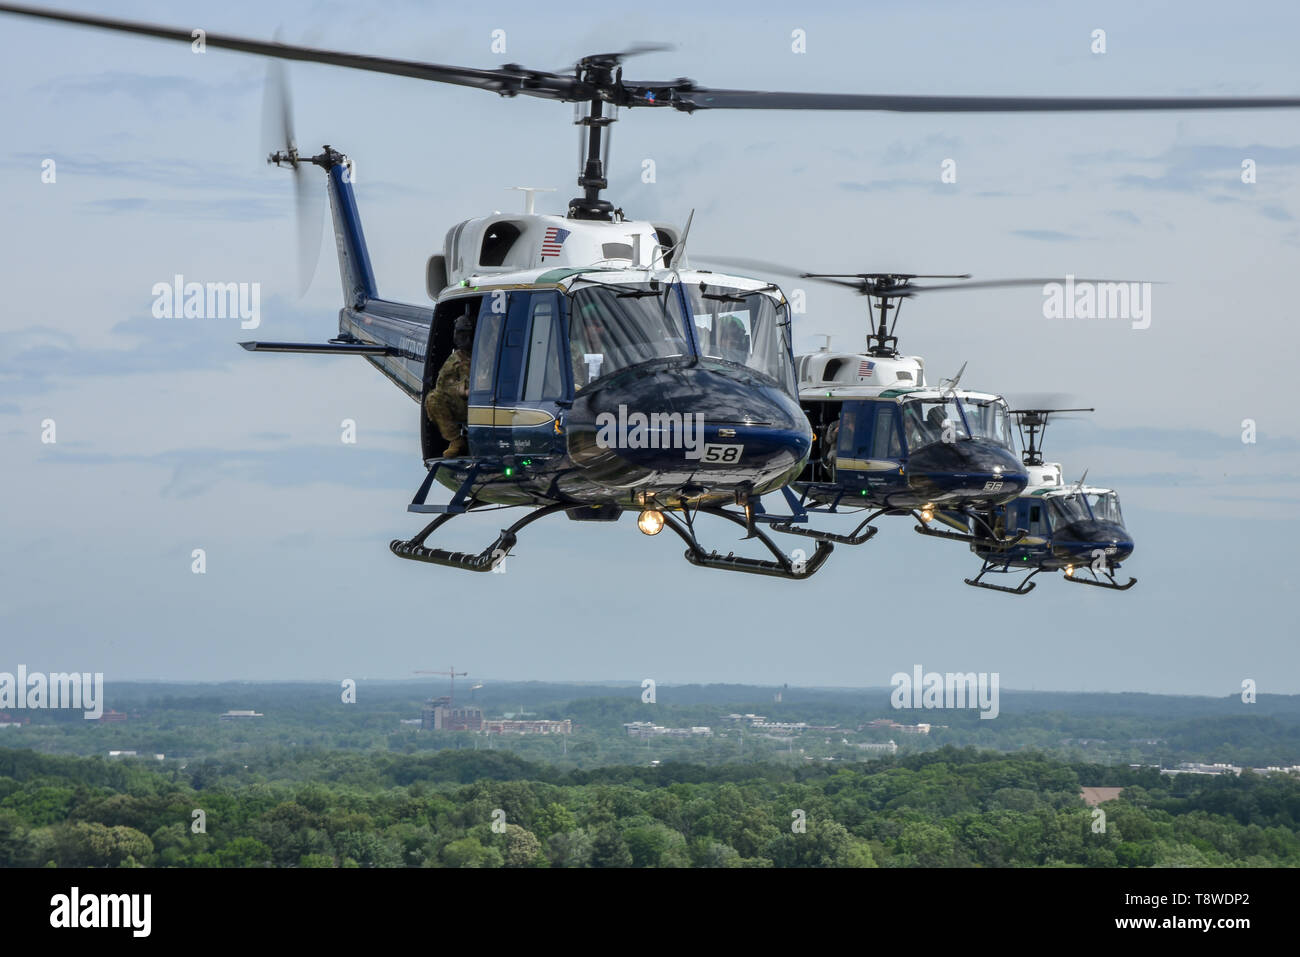 members-of-the-1st-helicopter-squadron-fly-uh-1-hueys-over-washington-during-opening-ceremonies-of-the-joint-base-andrews-air-space-expo-may-10-us-air-force-photo-by-2nd-lt-jessica-cicchetto-T8WDP2.jpg